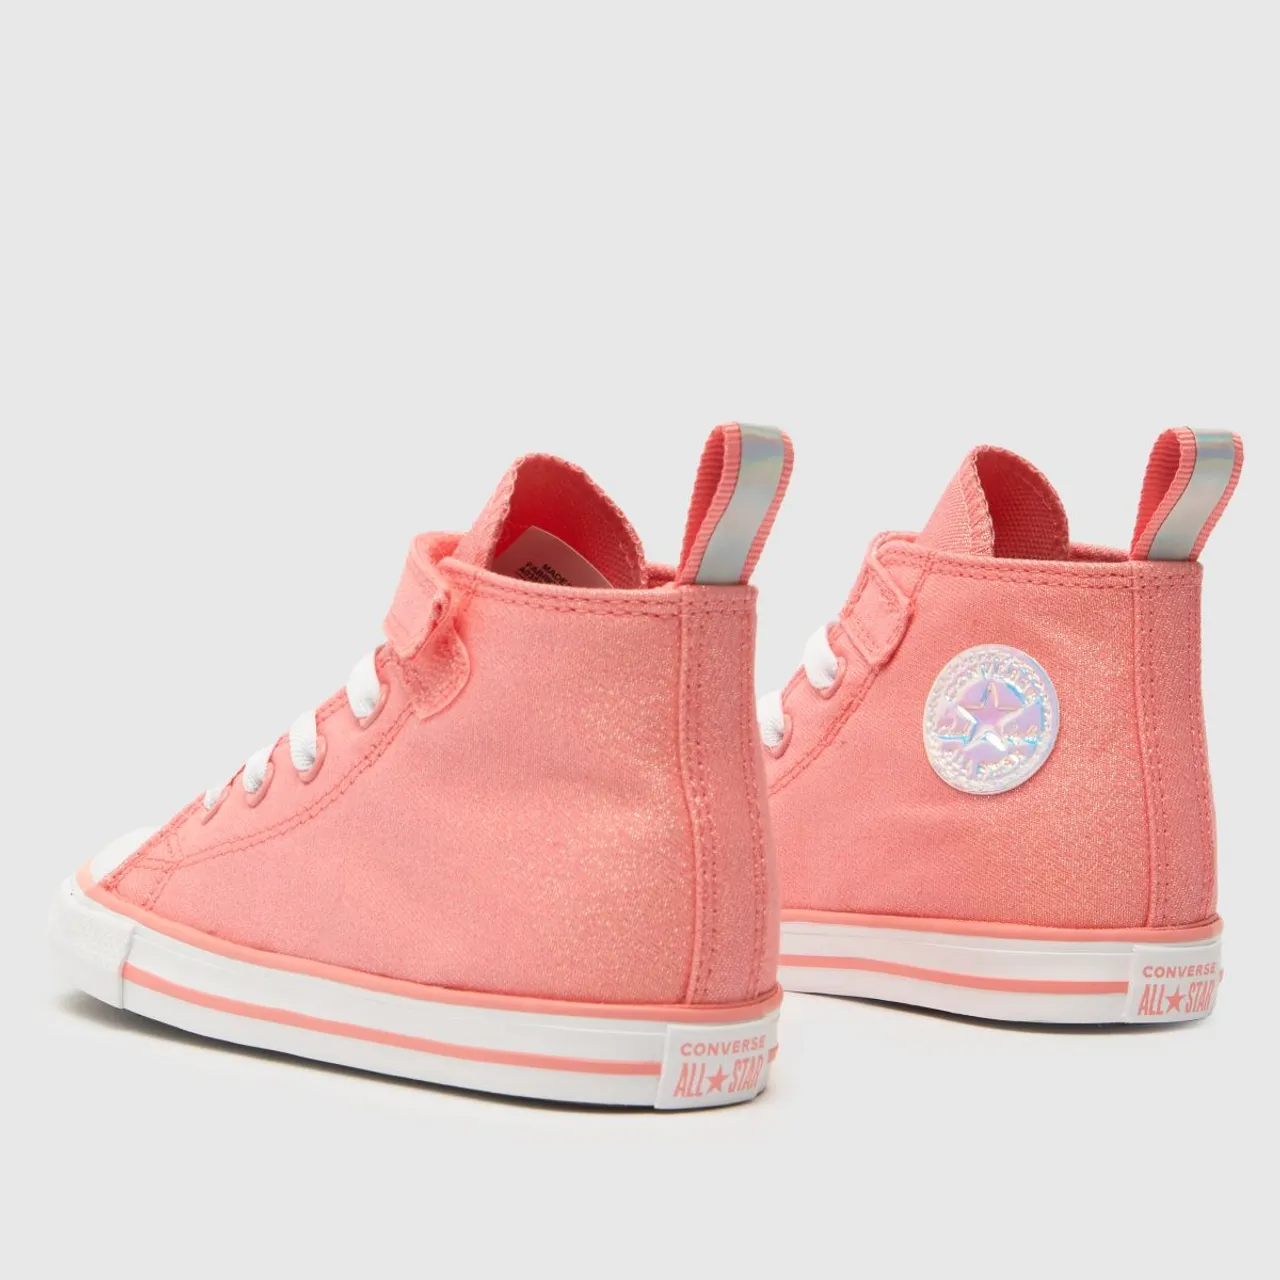 Converse Peach All Star Hi 1v Iridescent Girls Toddler Trainers